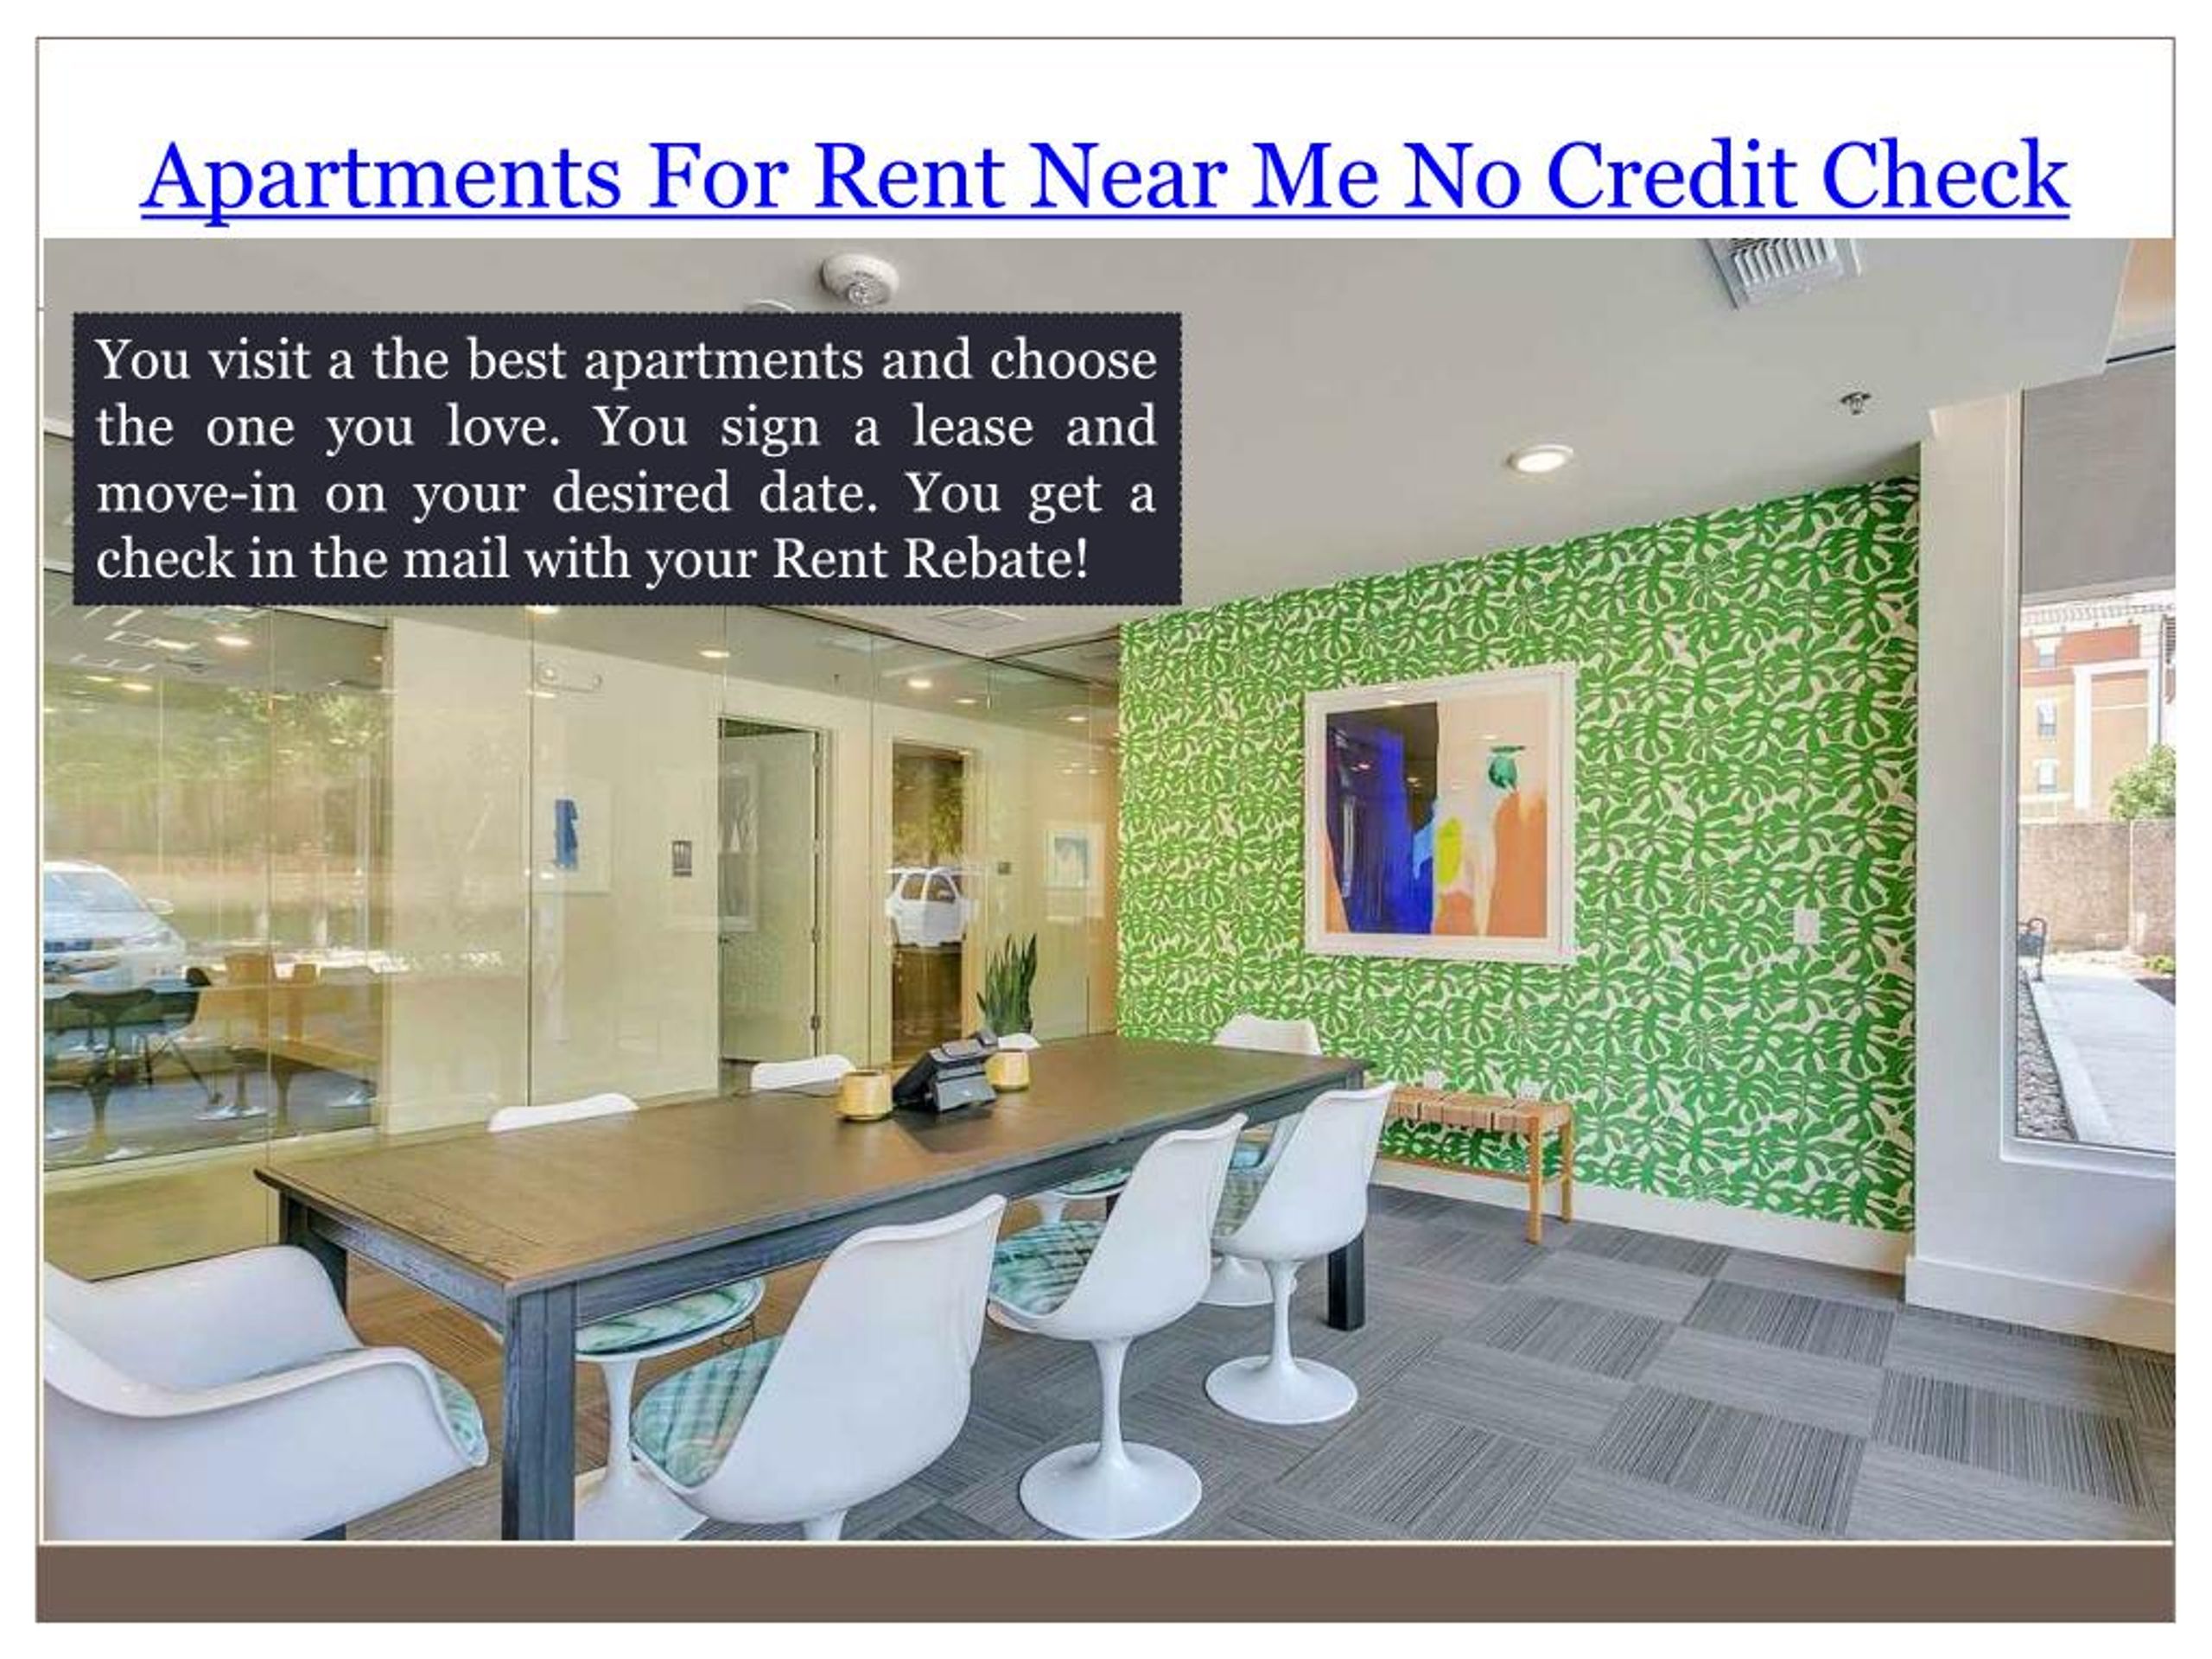 Ppt Apartments For Rent Near Me No Credit Check Powerpoint